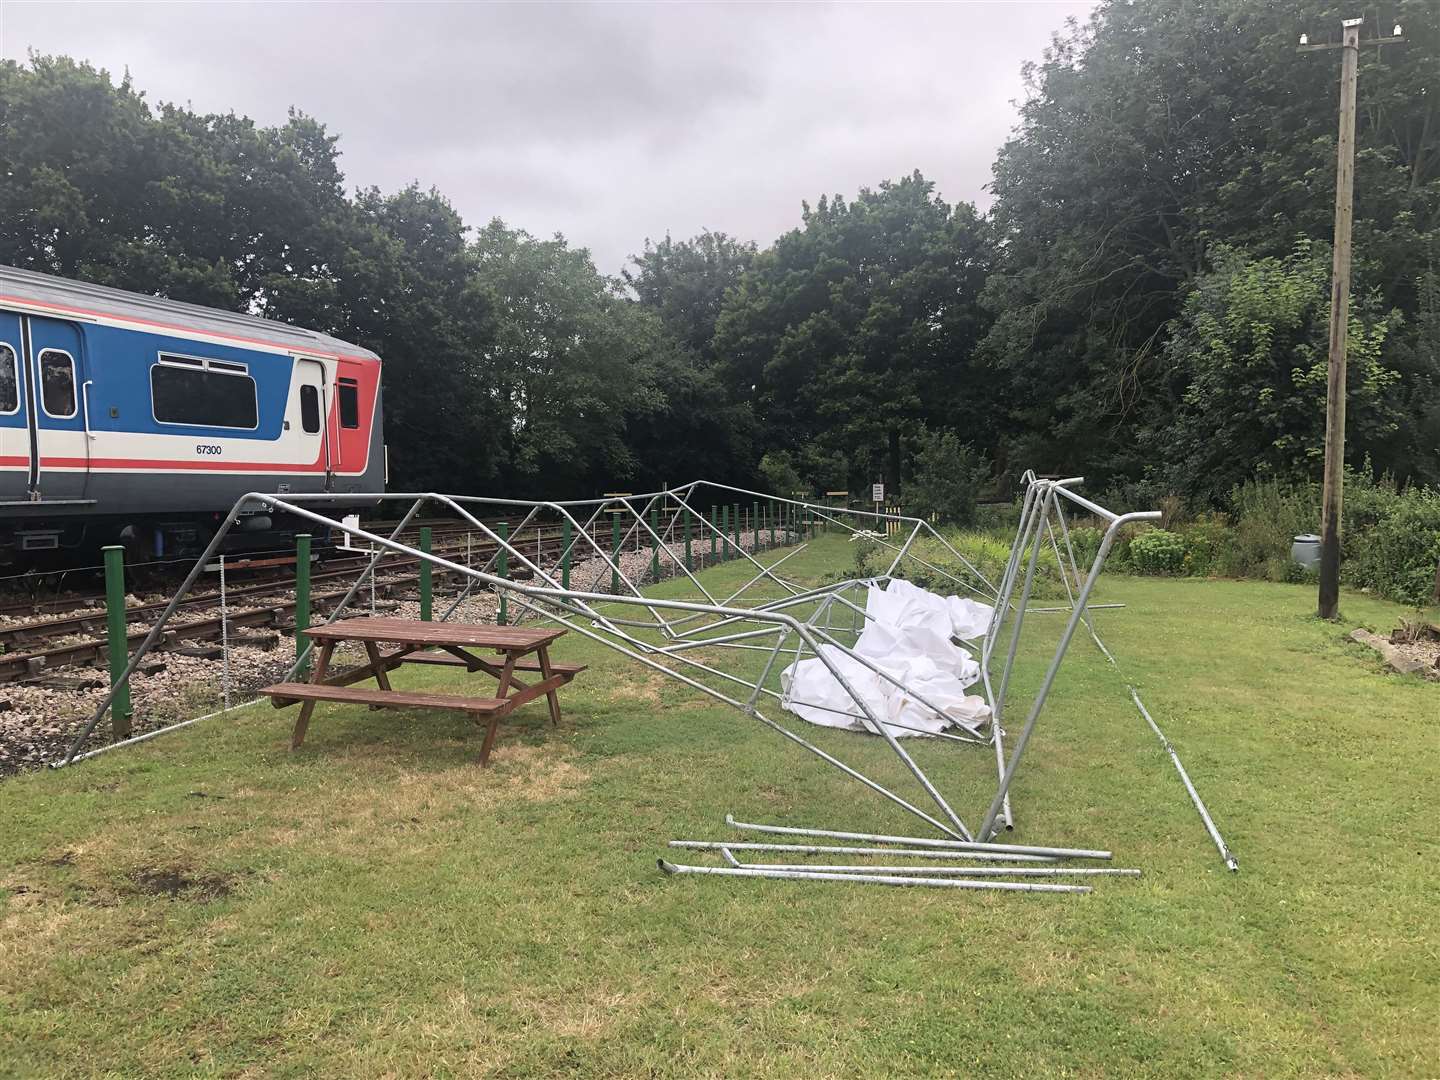 Previous vandalism at the East Kent Railway in August 2019